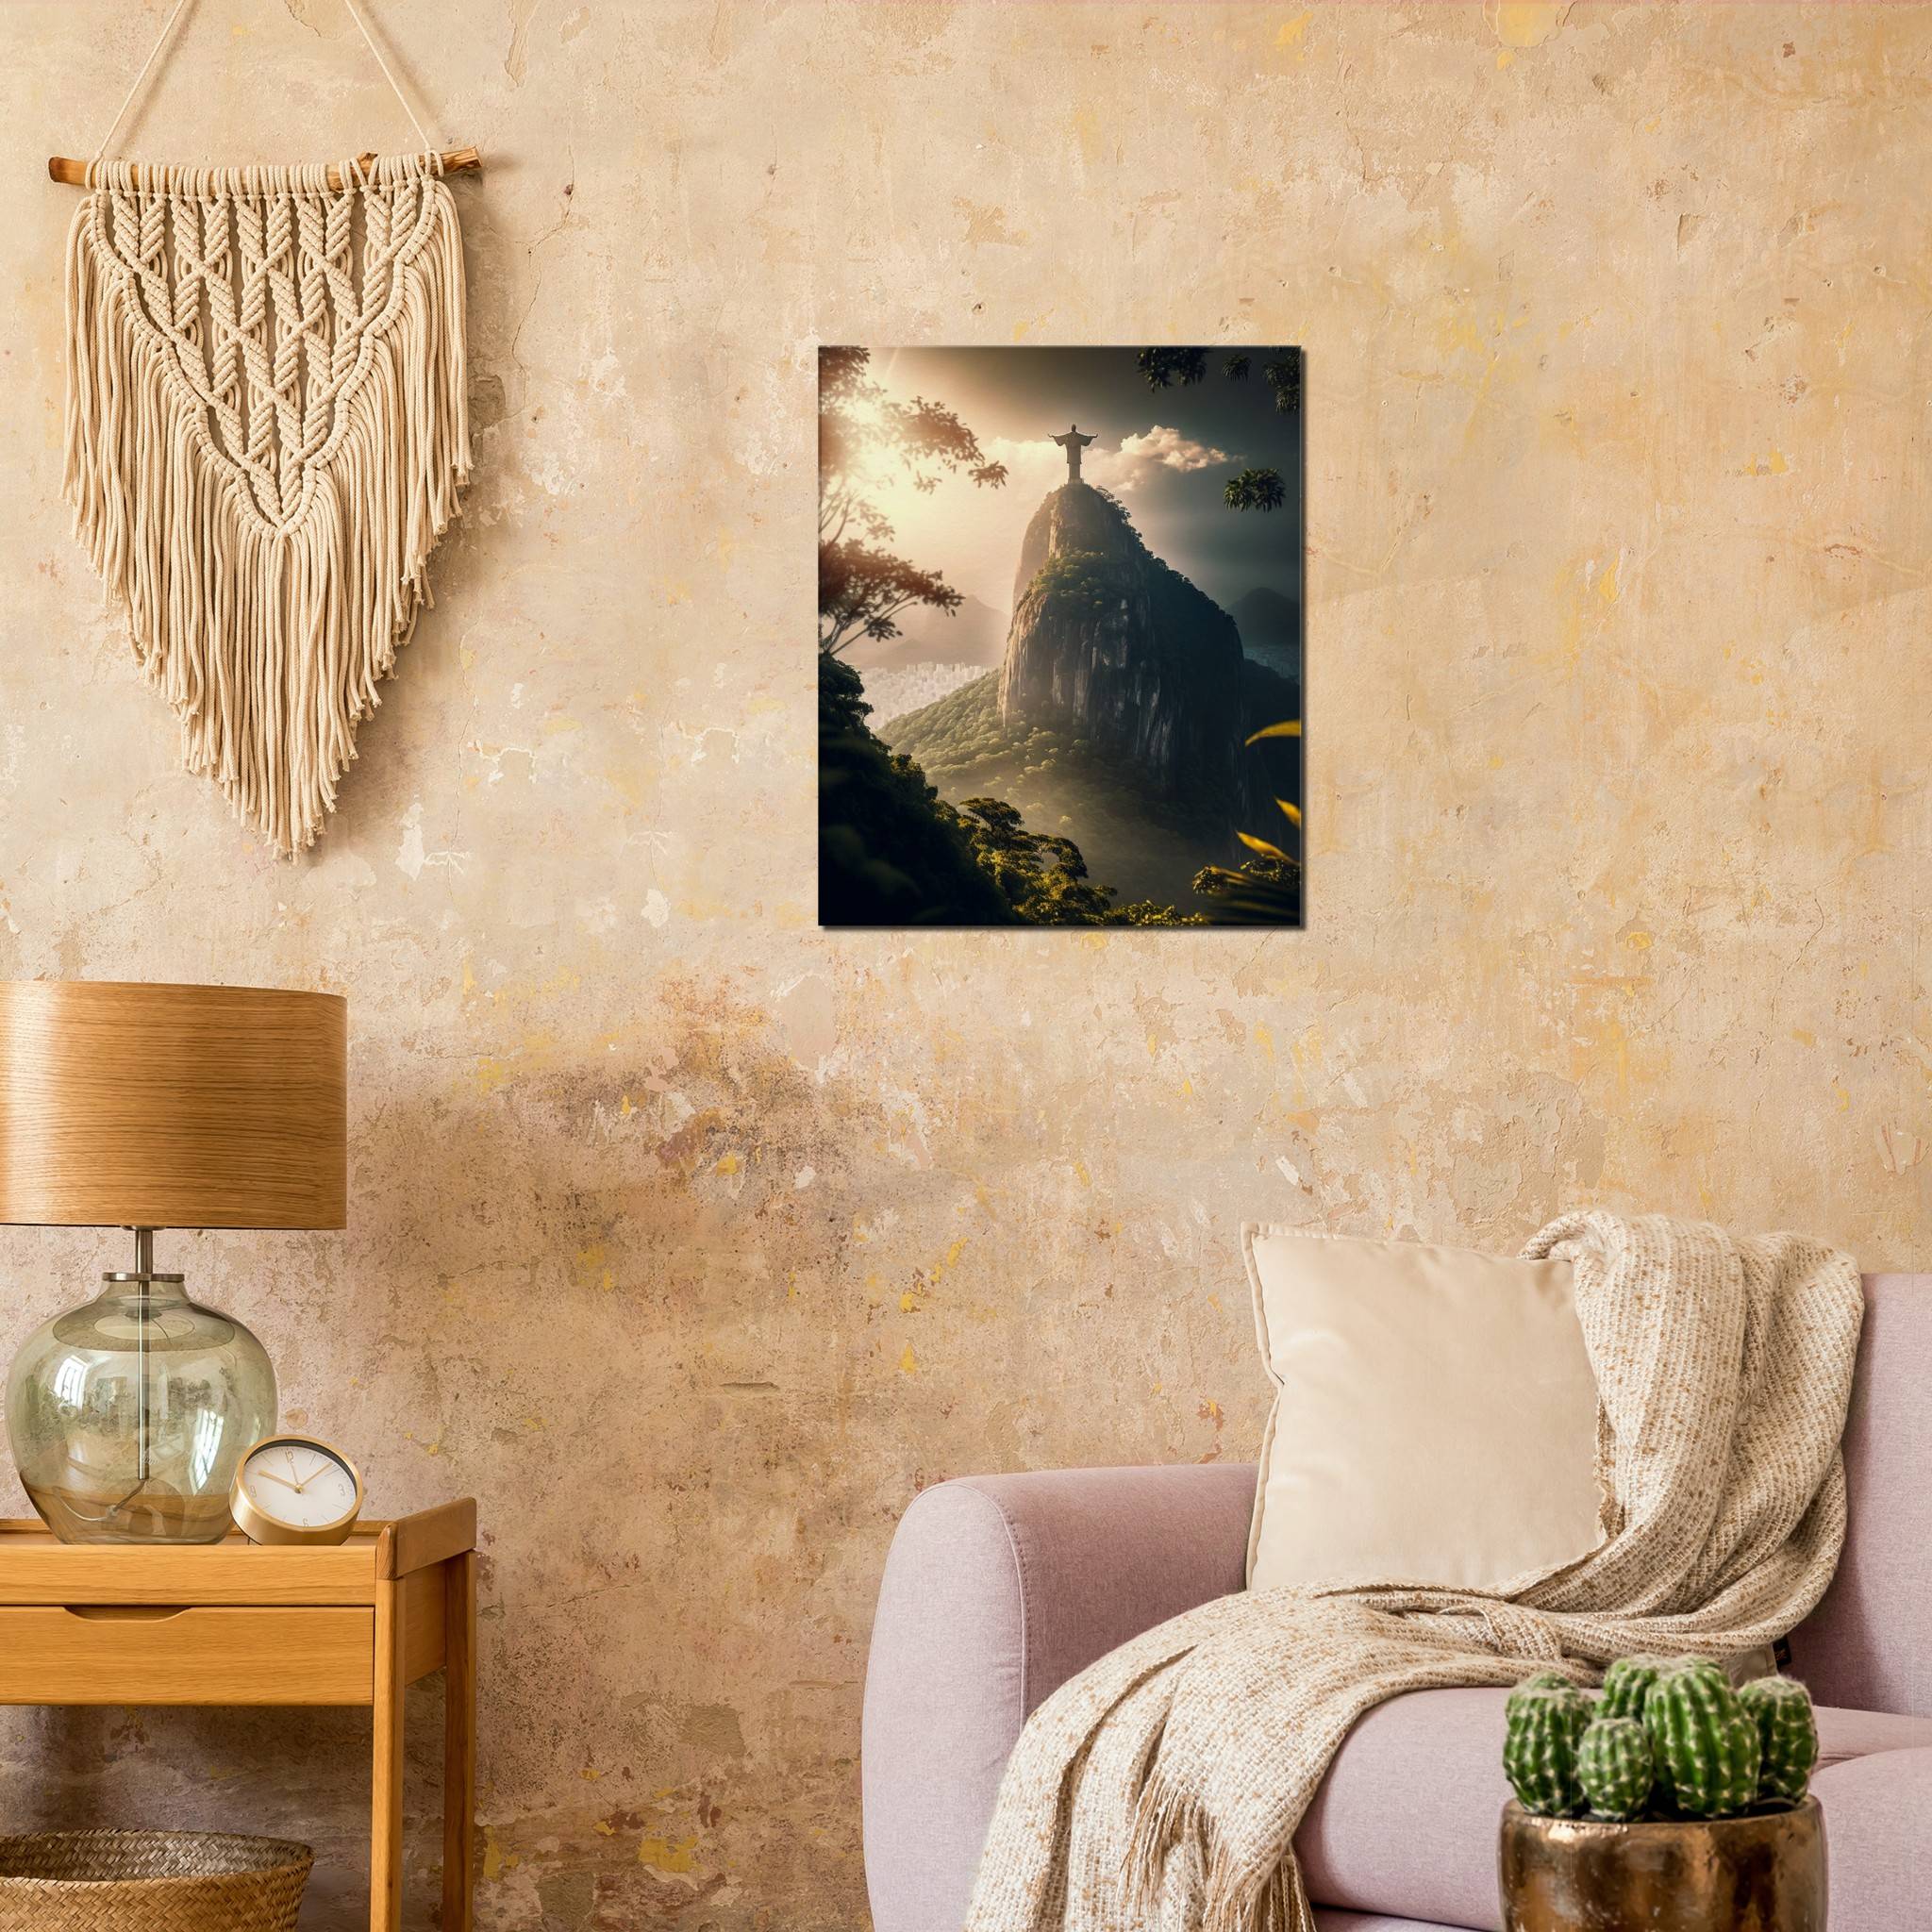 Christ the Redeemer 2 / 60 x 60cm (Canvas Print) Canvas Print Canvas reproduction The Pianist Print On Demand Fabled Gallery https://fabledgallery.art/product/christ-the-redeemer-2-60-x-60cm-canvas-print/